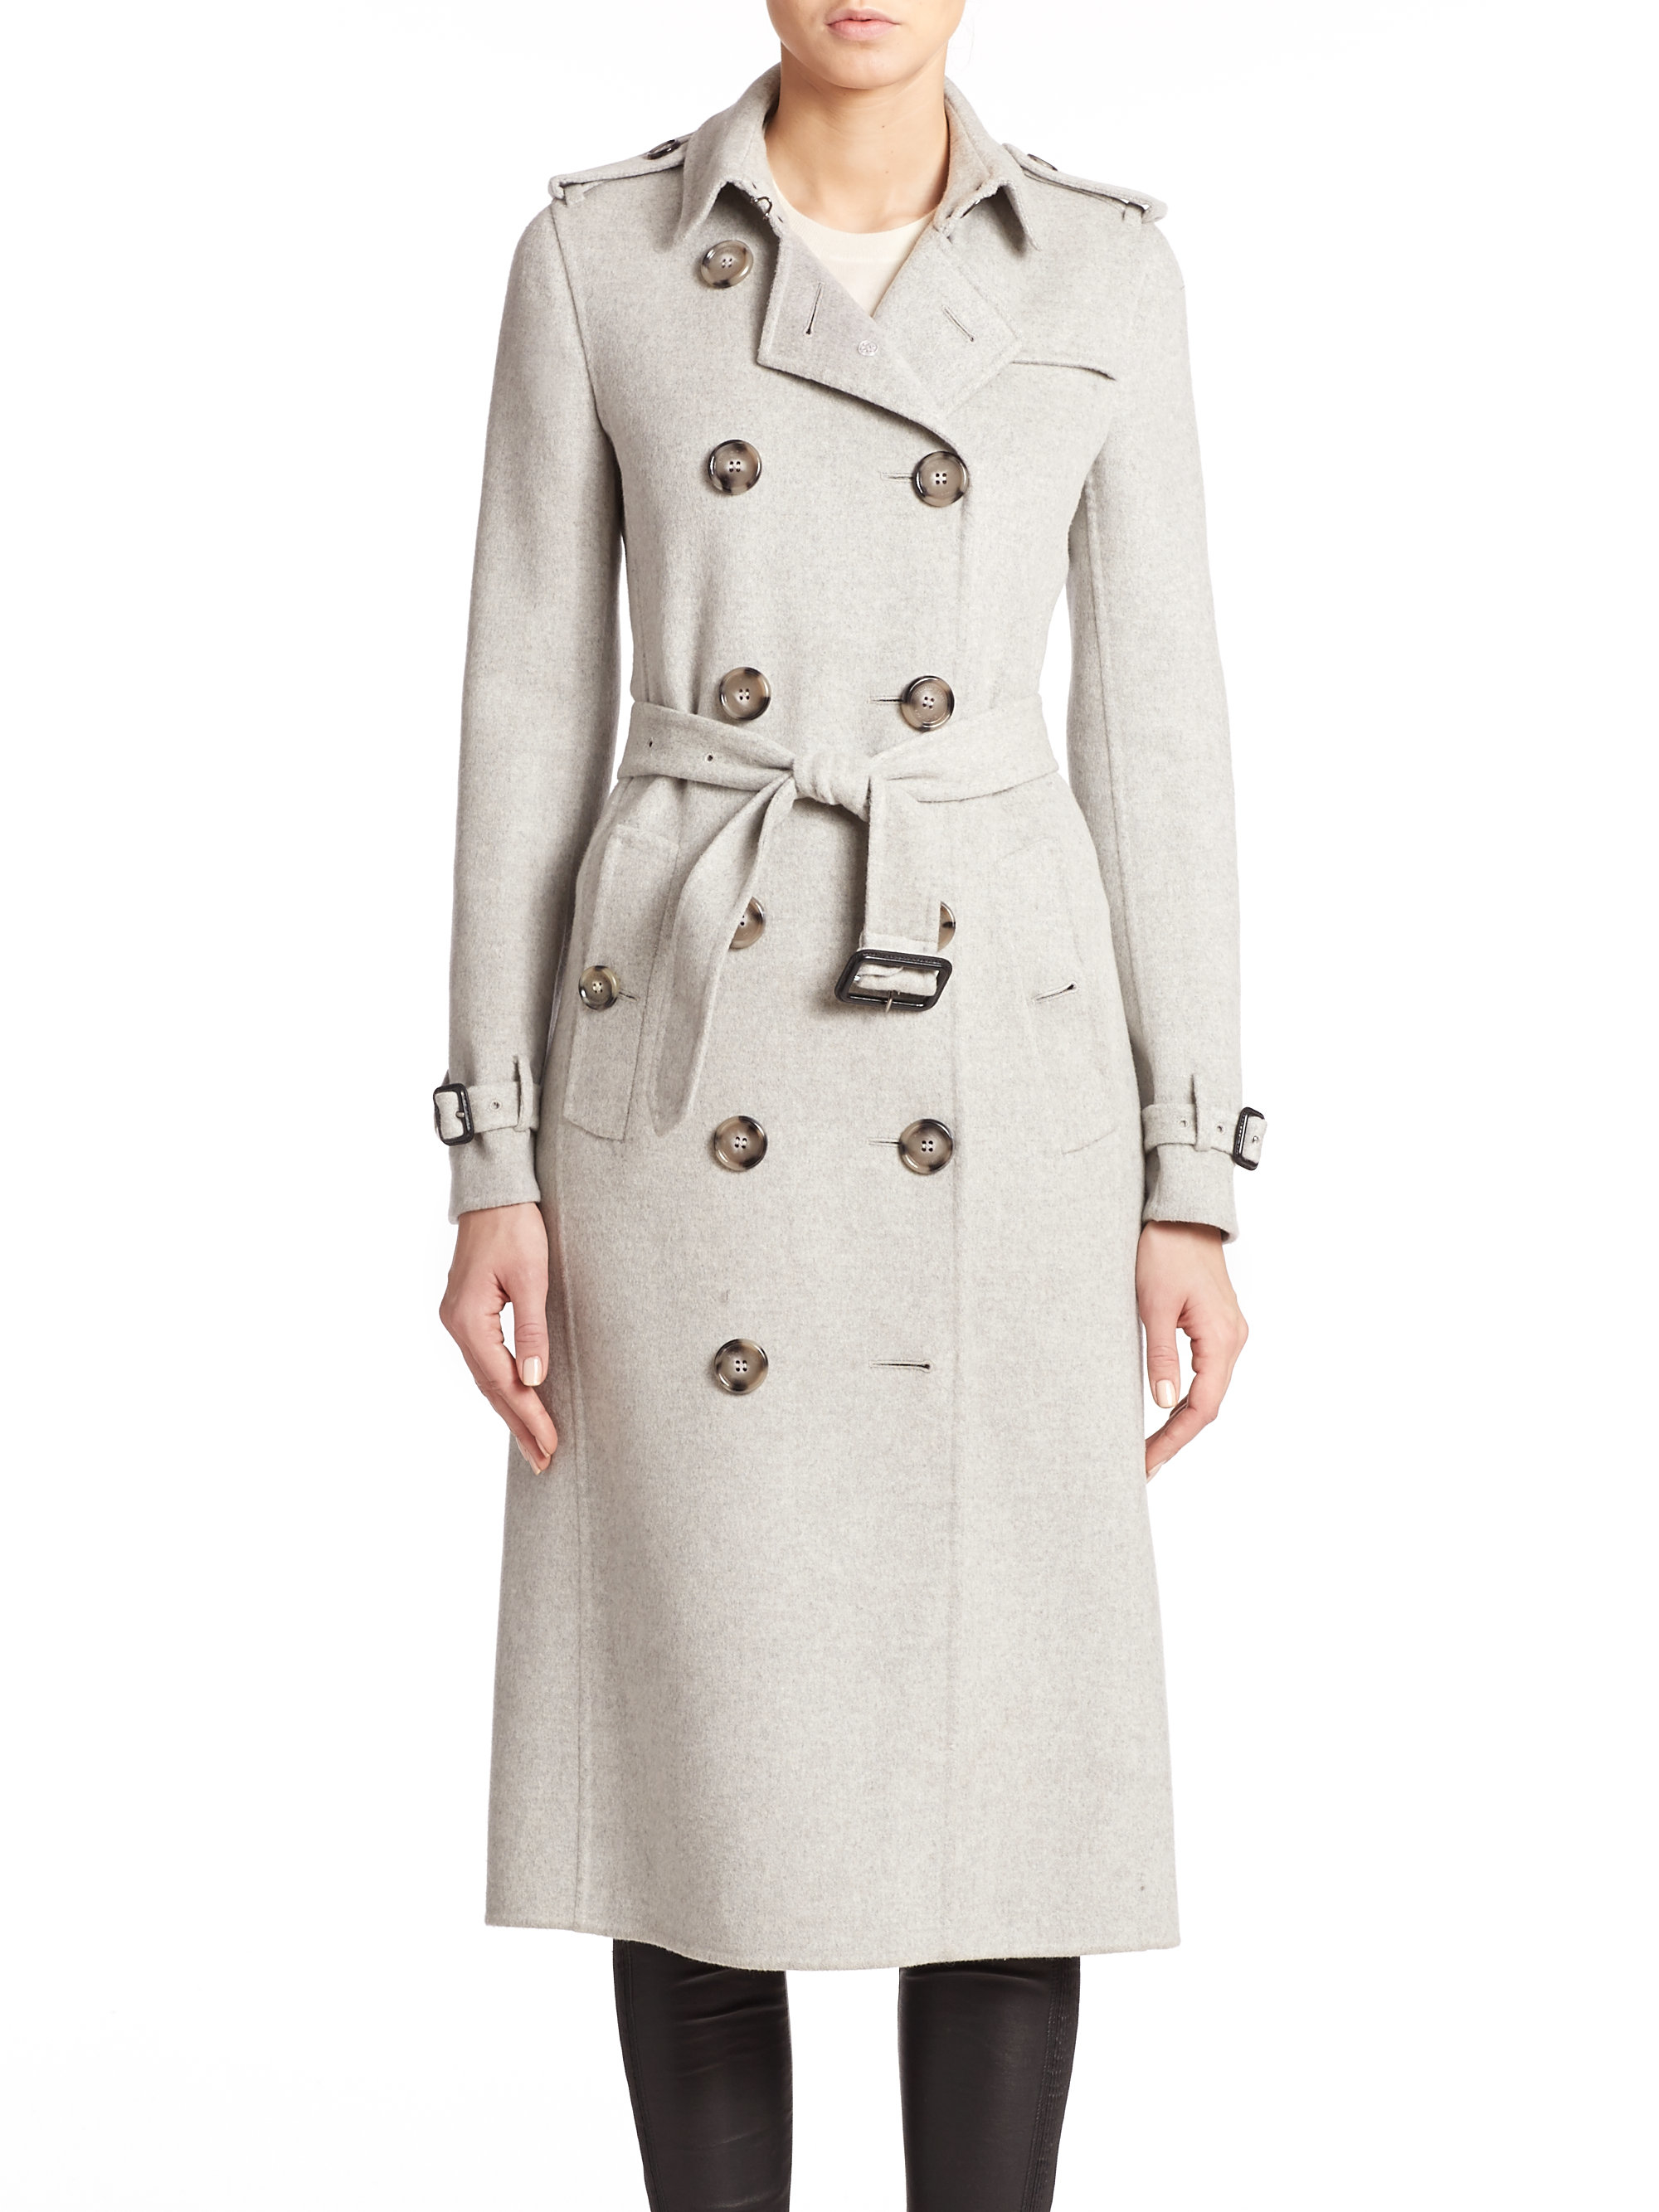 Lyst - Burberry Kensington Cashmere Trenchcoat in Gray